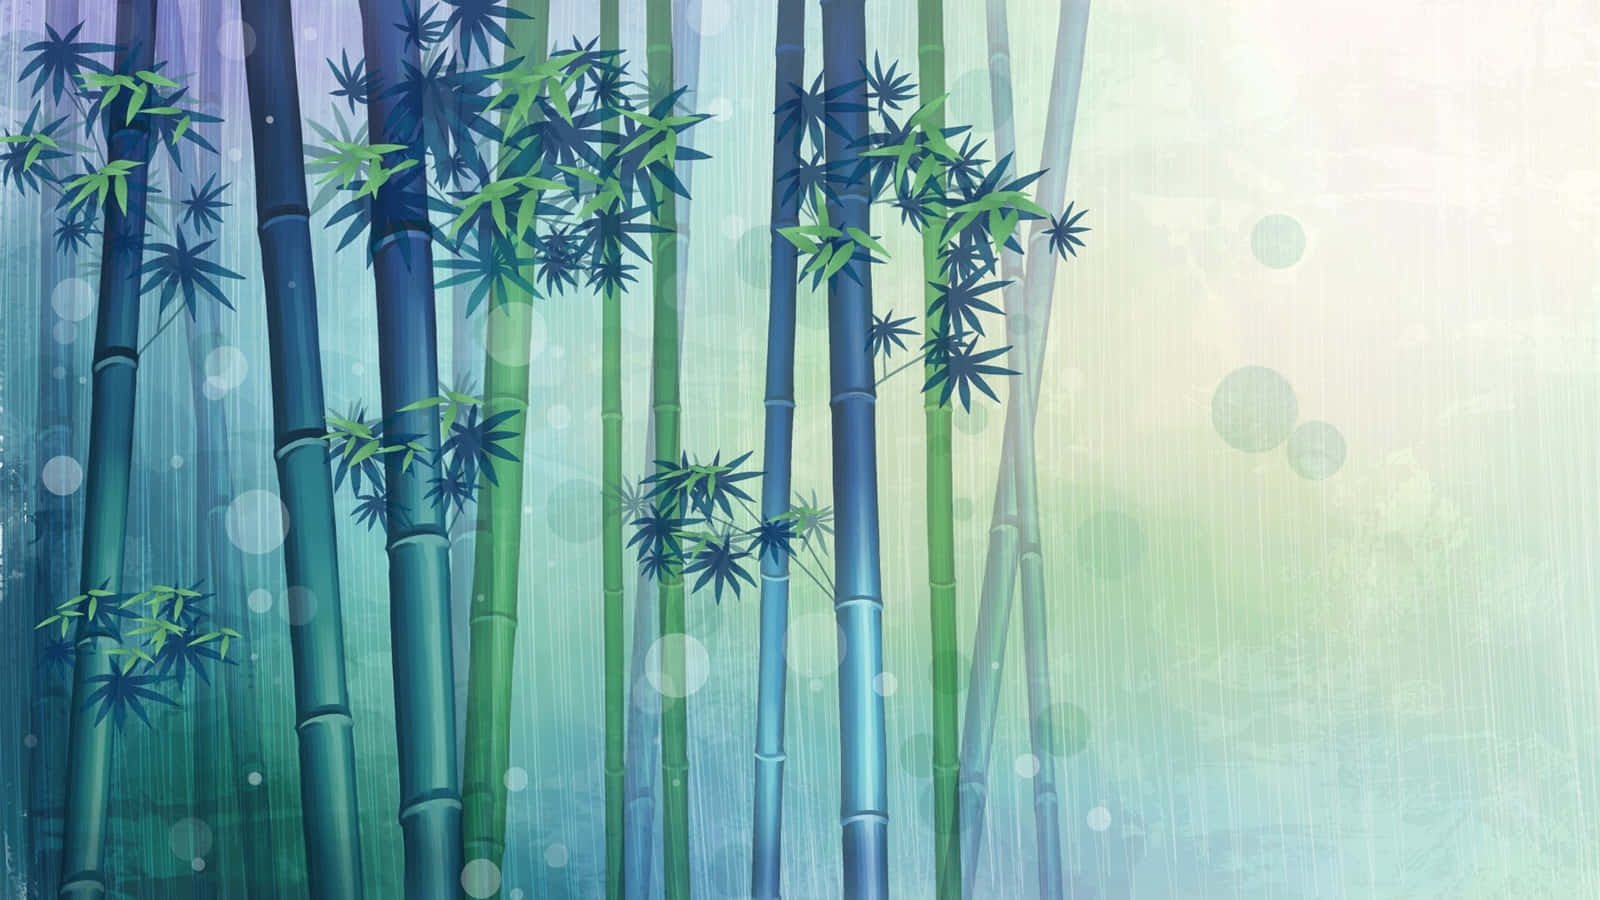 Journey Through The Majestic Bamboo Forest Wallpaper